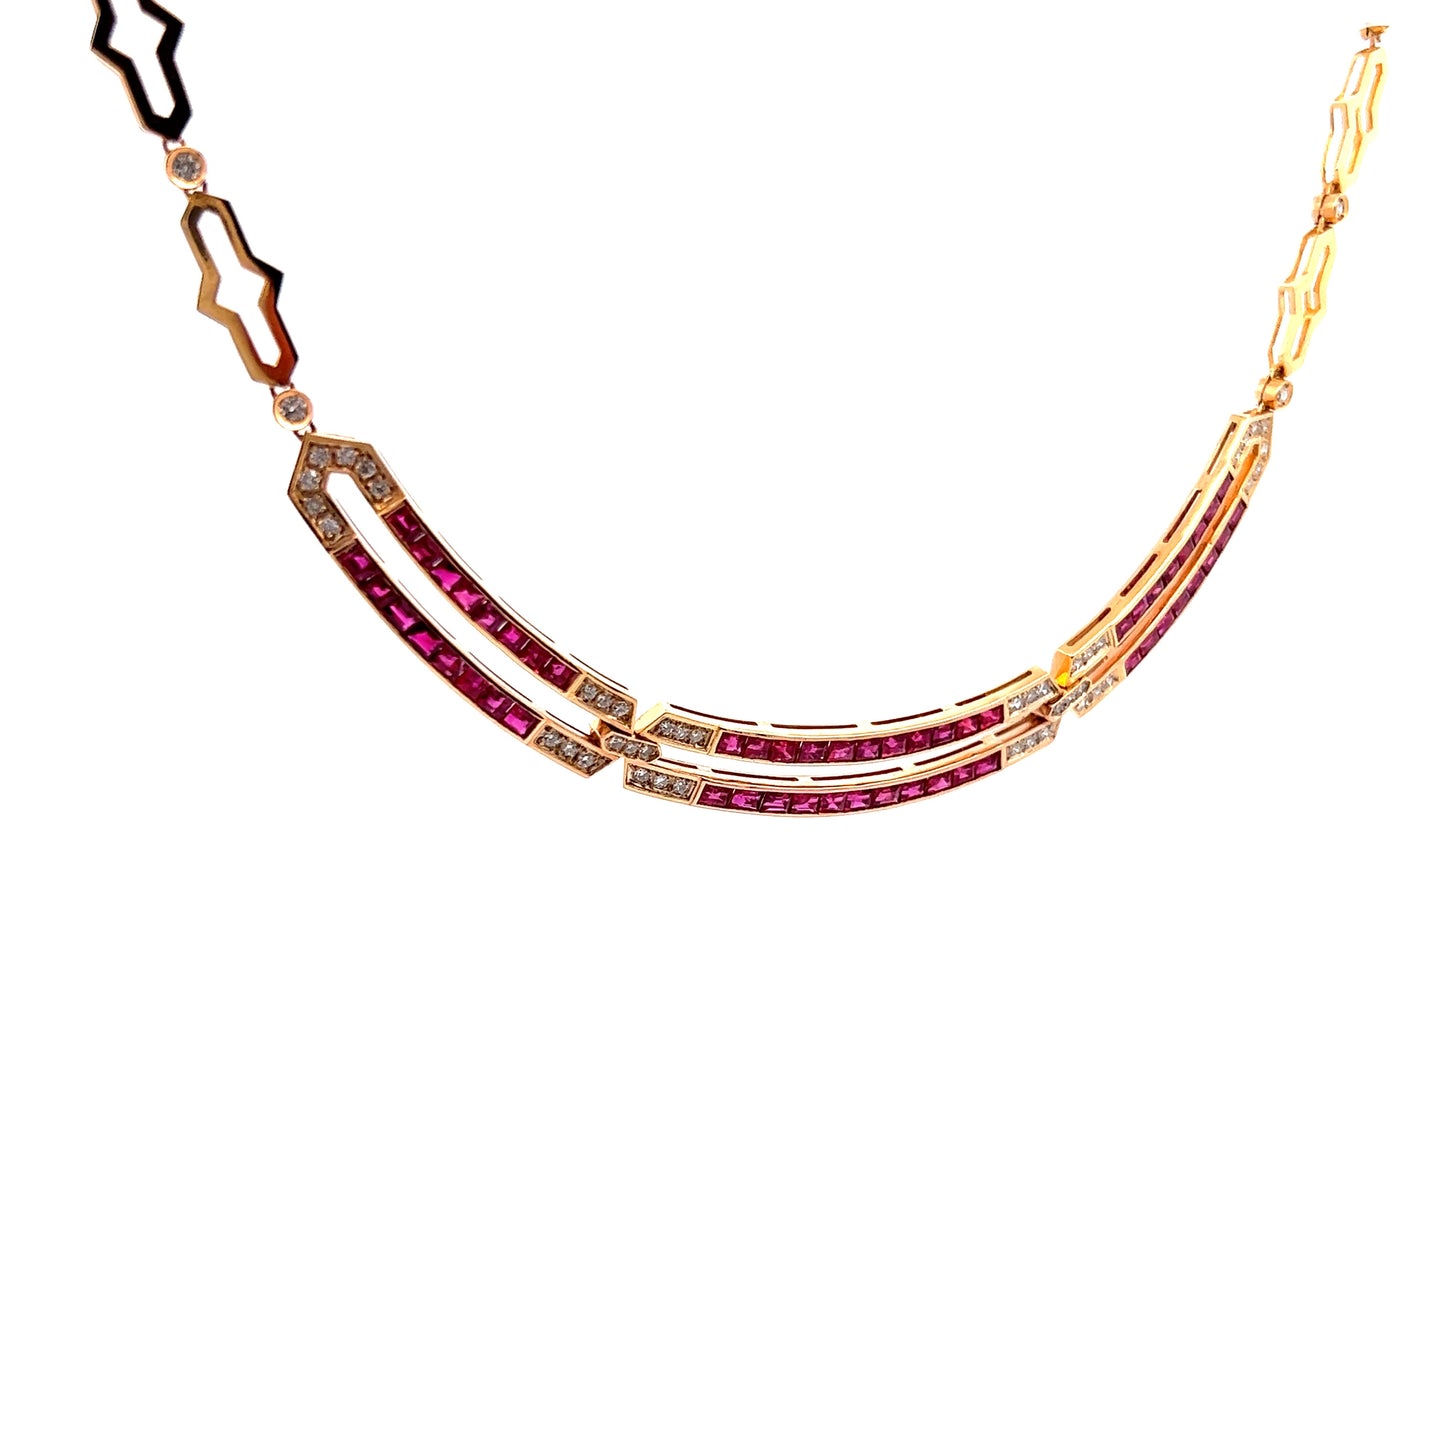 8.64 Emerald Cut Ruby & Diamond Necklace in 14k Yellow Gold